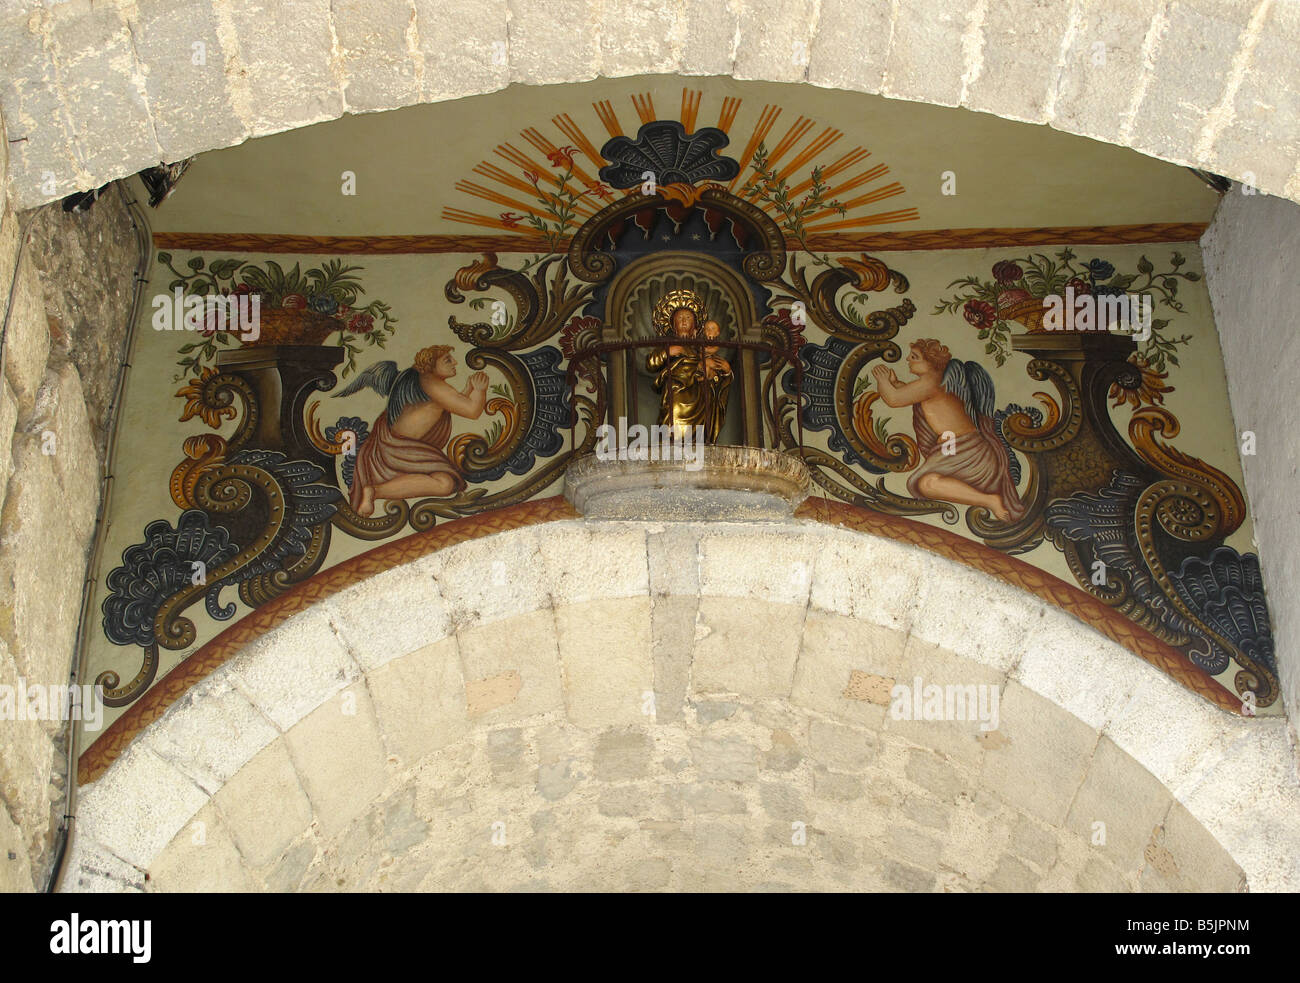 Stylised religious iconic art fresco painted under archway bridging thestreet near Pujada a la Catedral, Girona, Catalonia,Spain Stock Photo